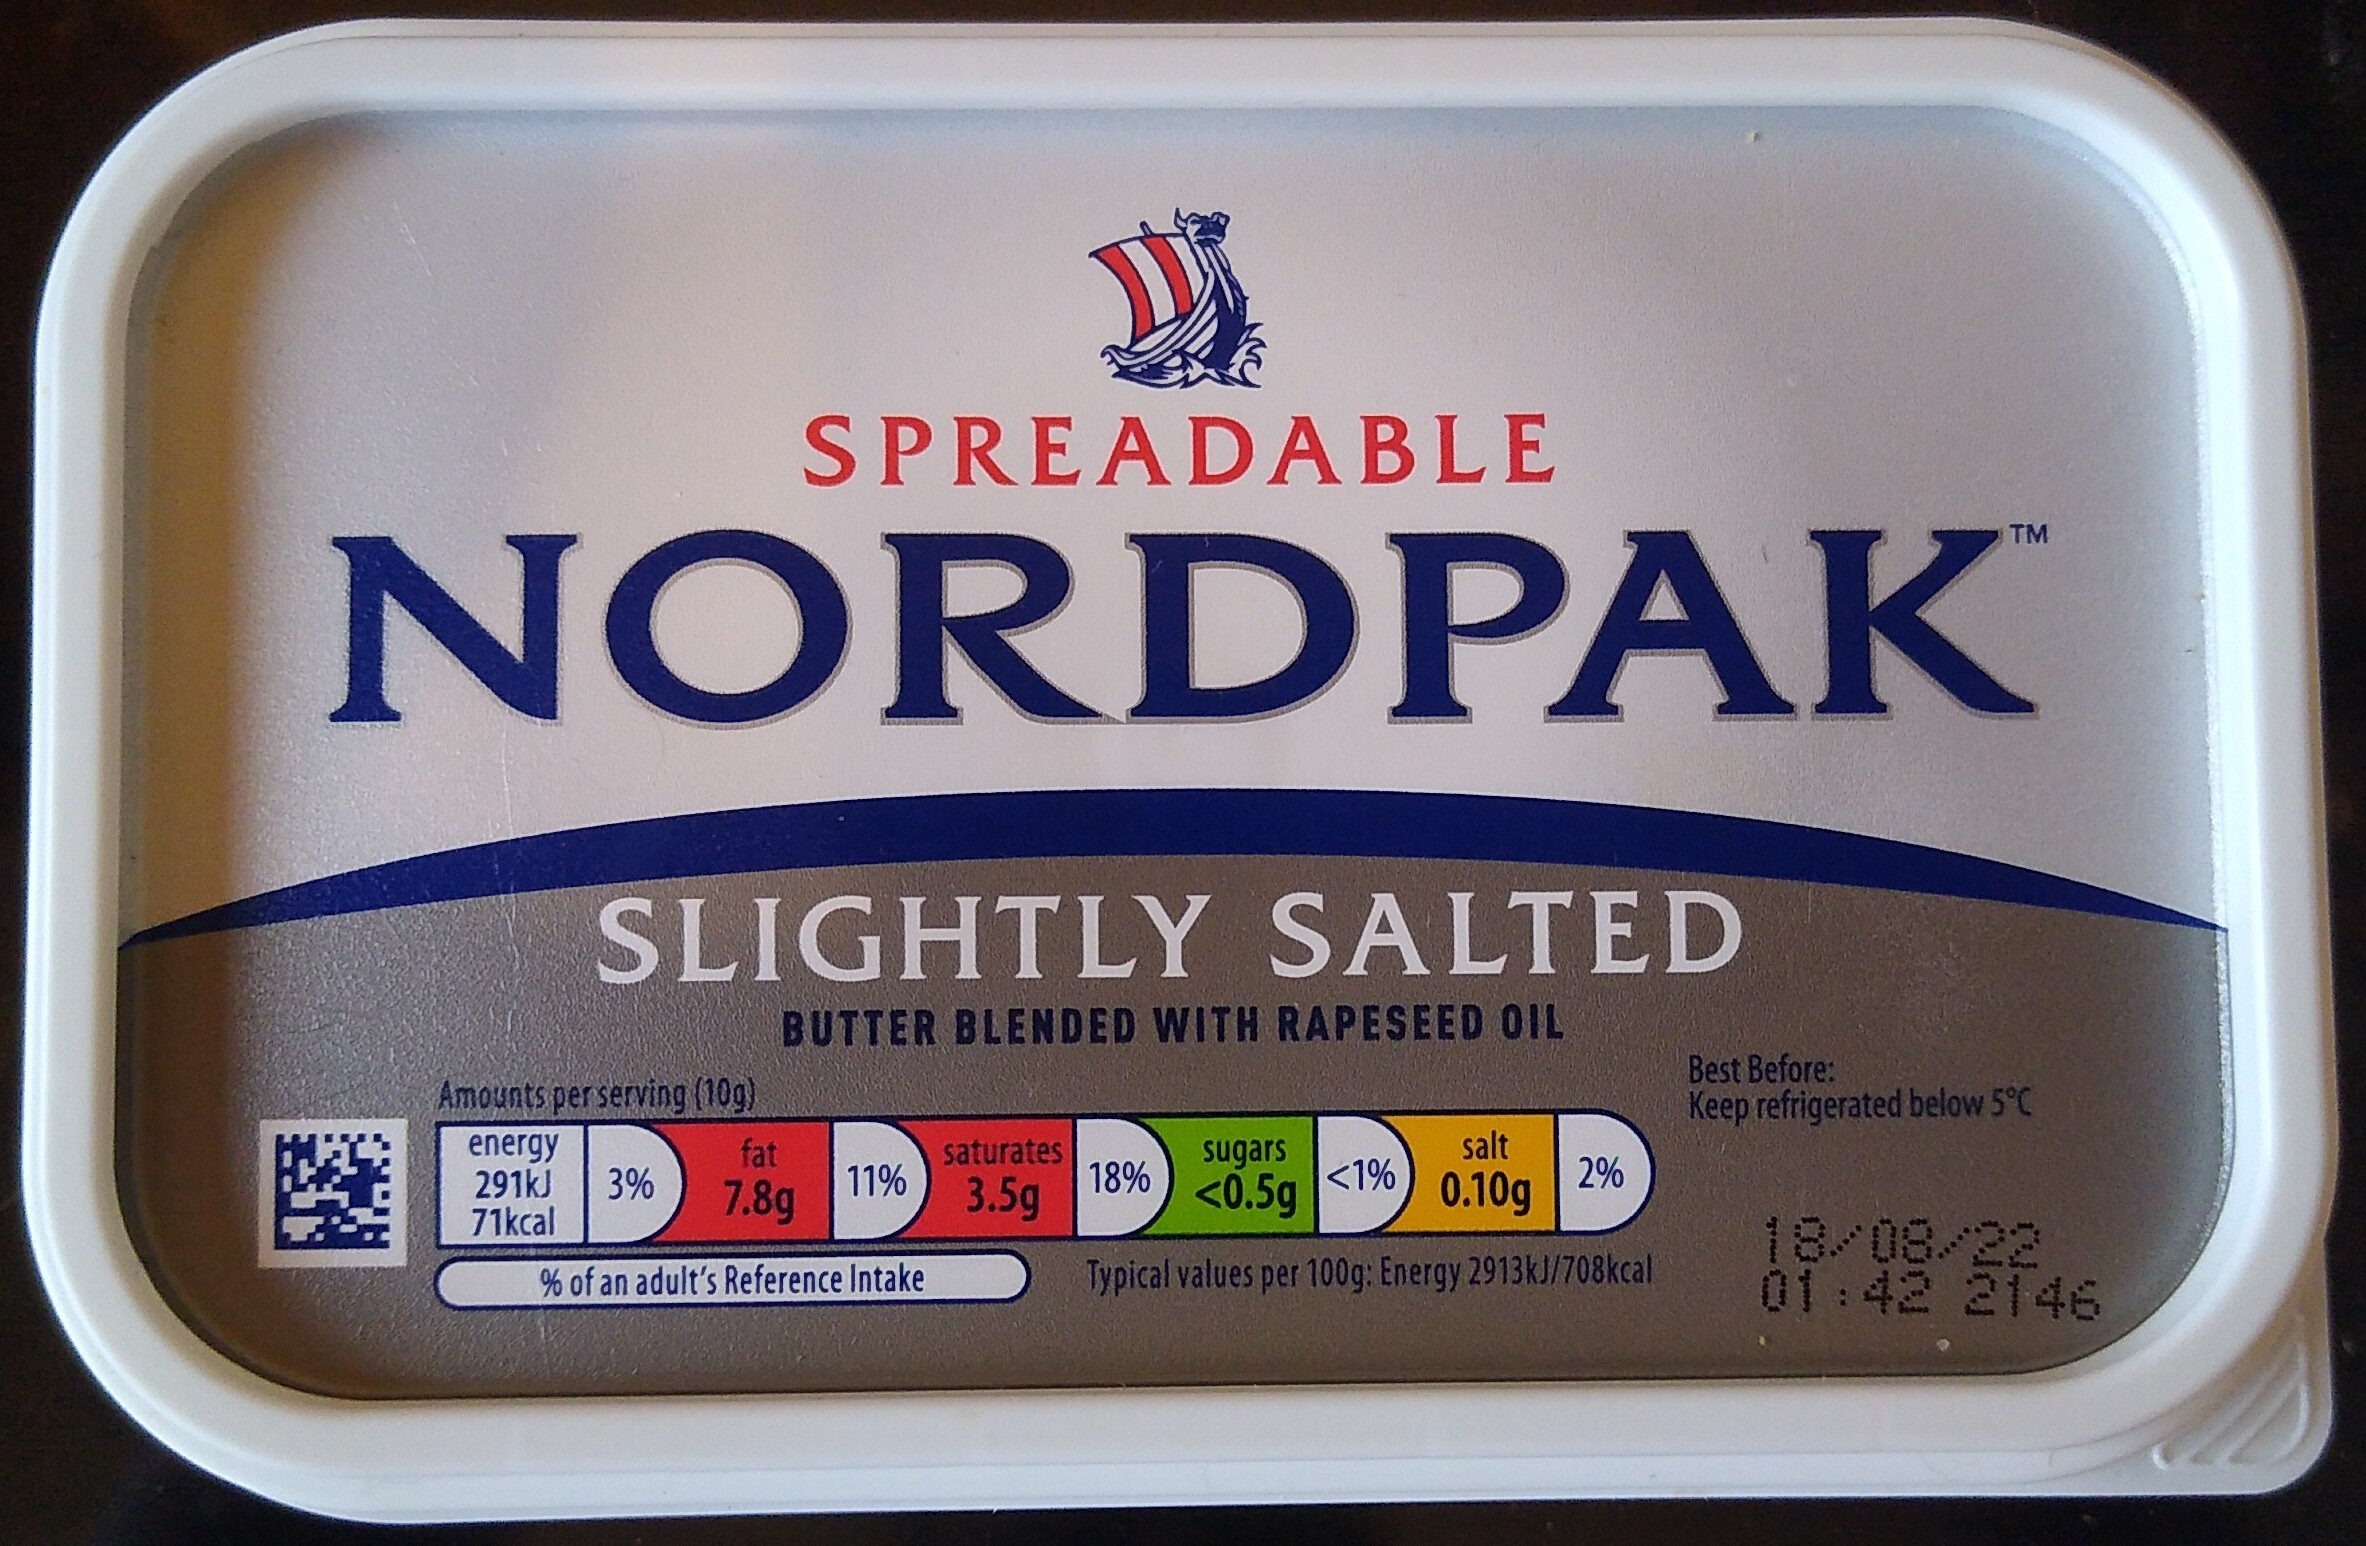 Nordpak Slightly Salted Spreadable Butter - Product